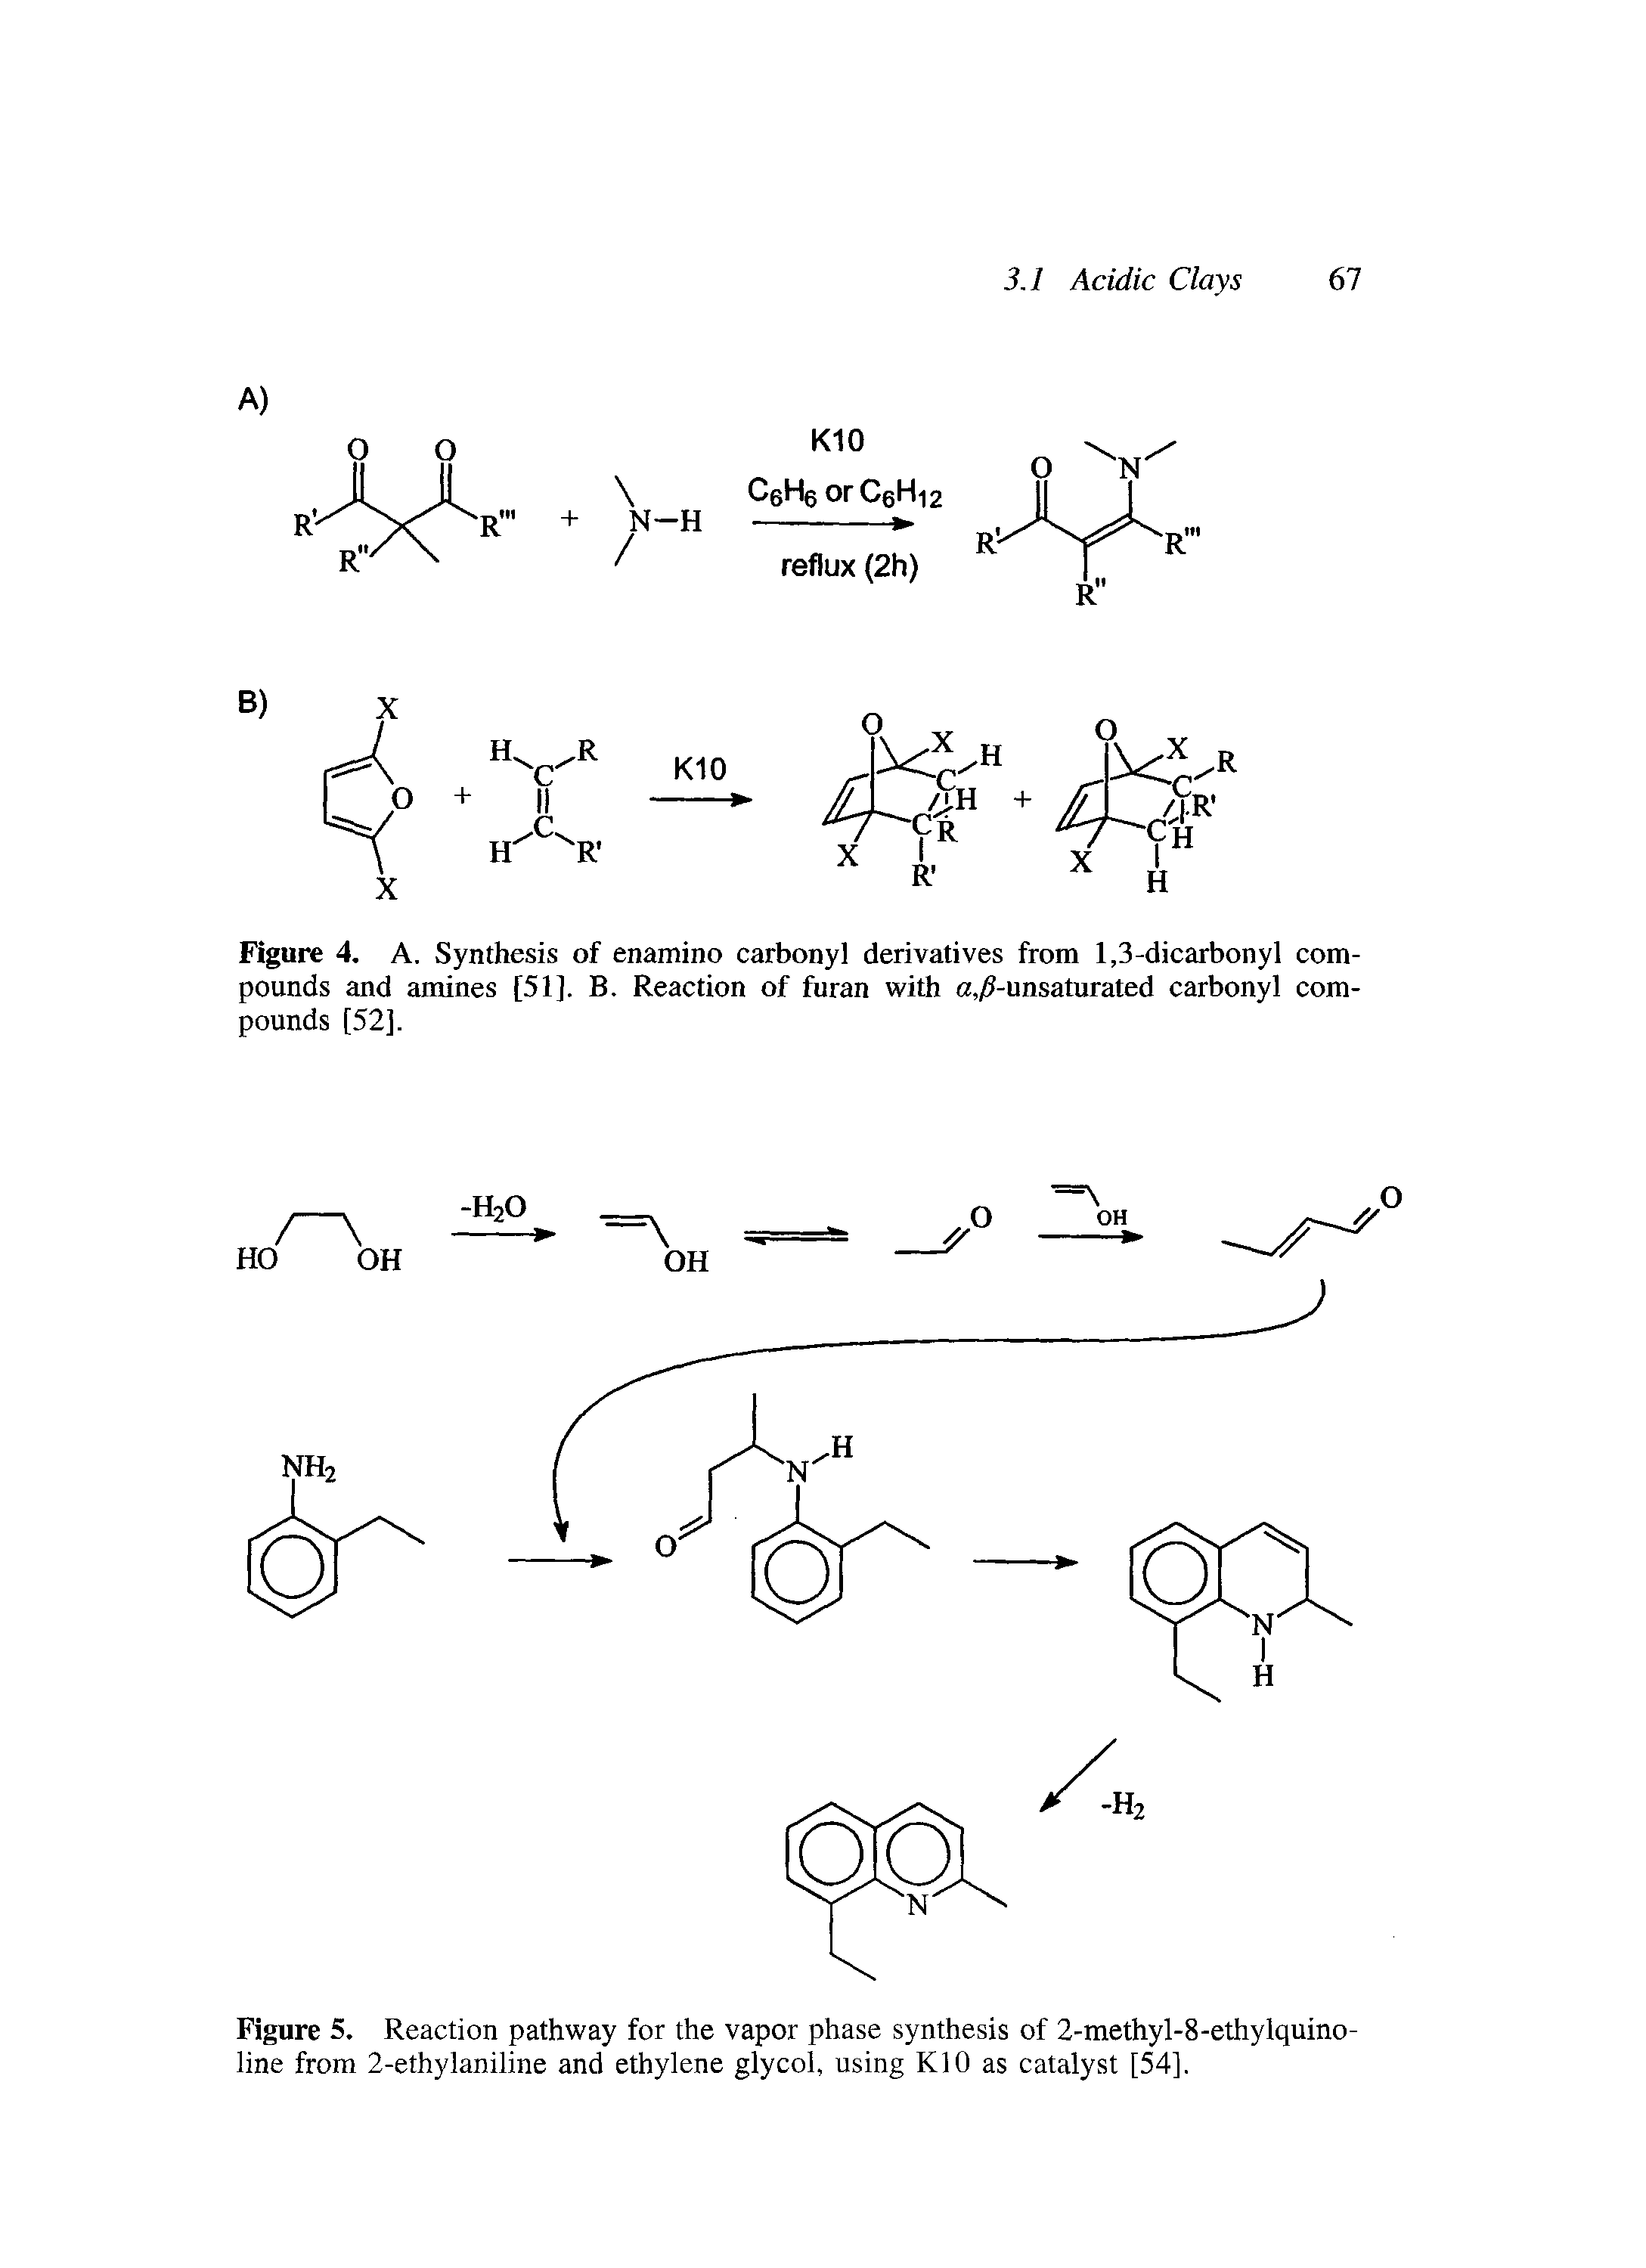 Figure 4. A. Synthesis of enamino carbonyl derivatives from 1,3-dicarbonyl compounds and amines [51], B. Reaction of furan with a,/0-unsaturated carbonyl compounds [52].